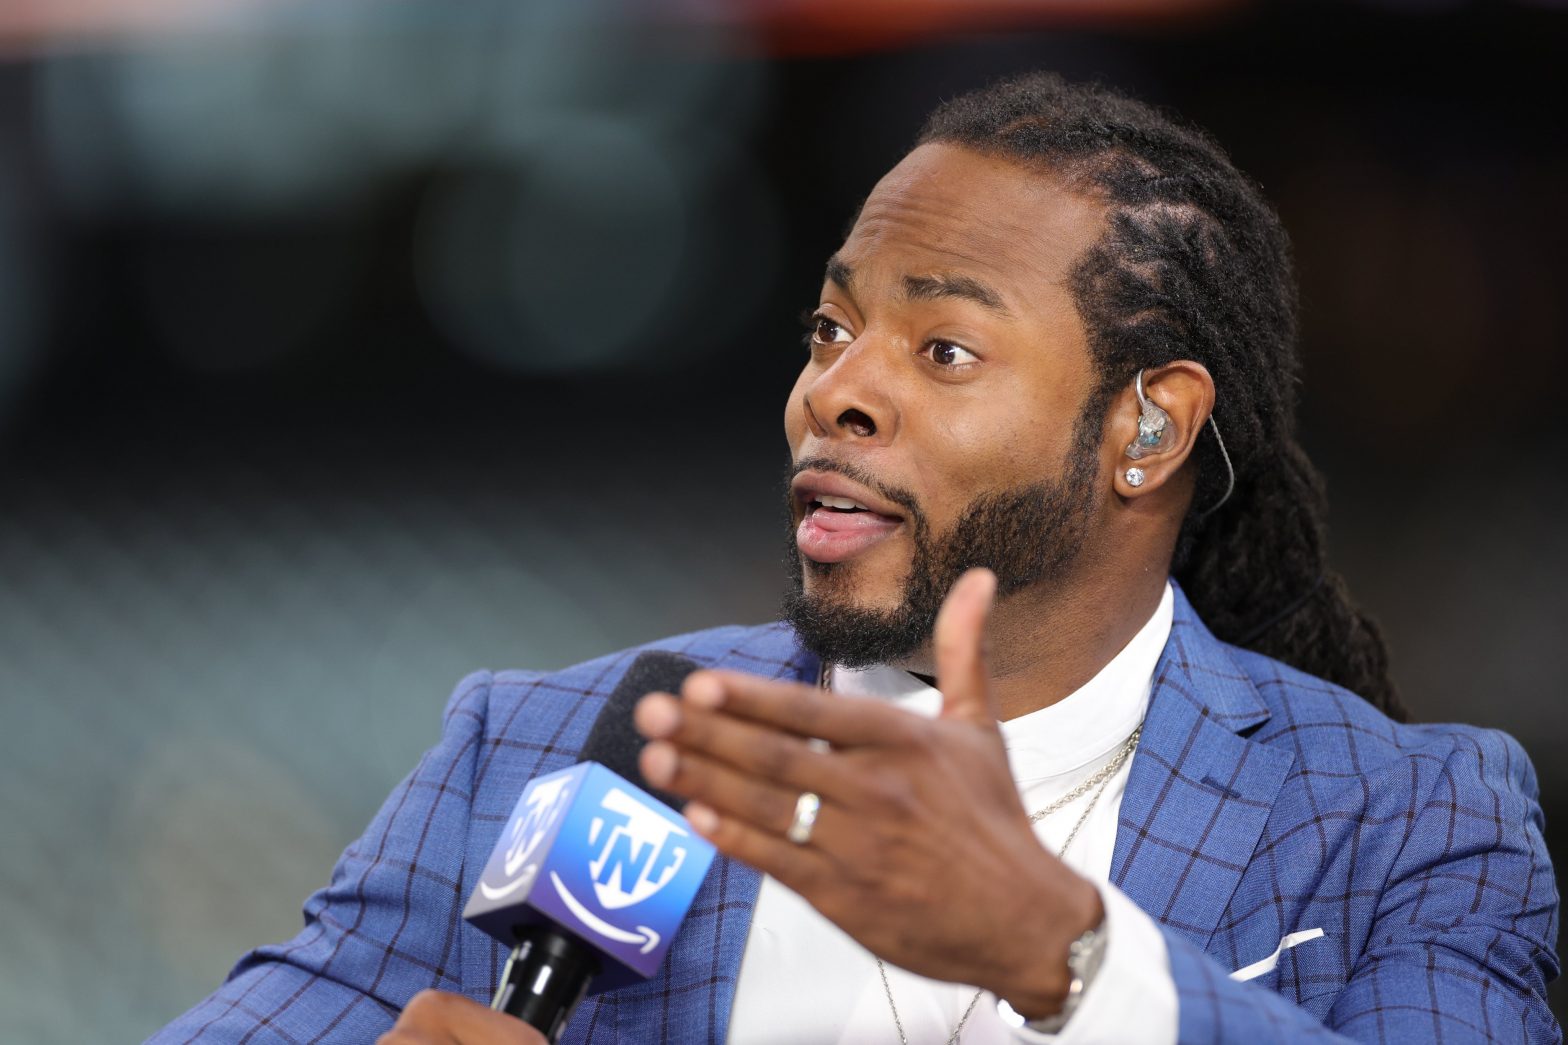 Richard Sherman to replace Shannon Sharpe on Skip Bayless’ Undisputed: Report